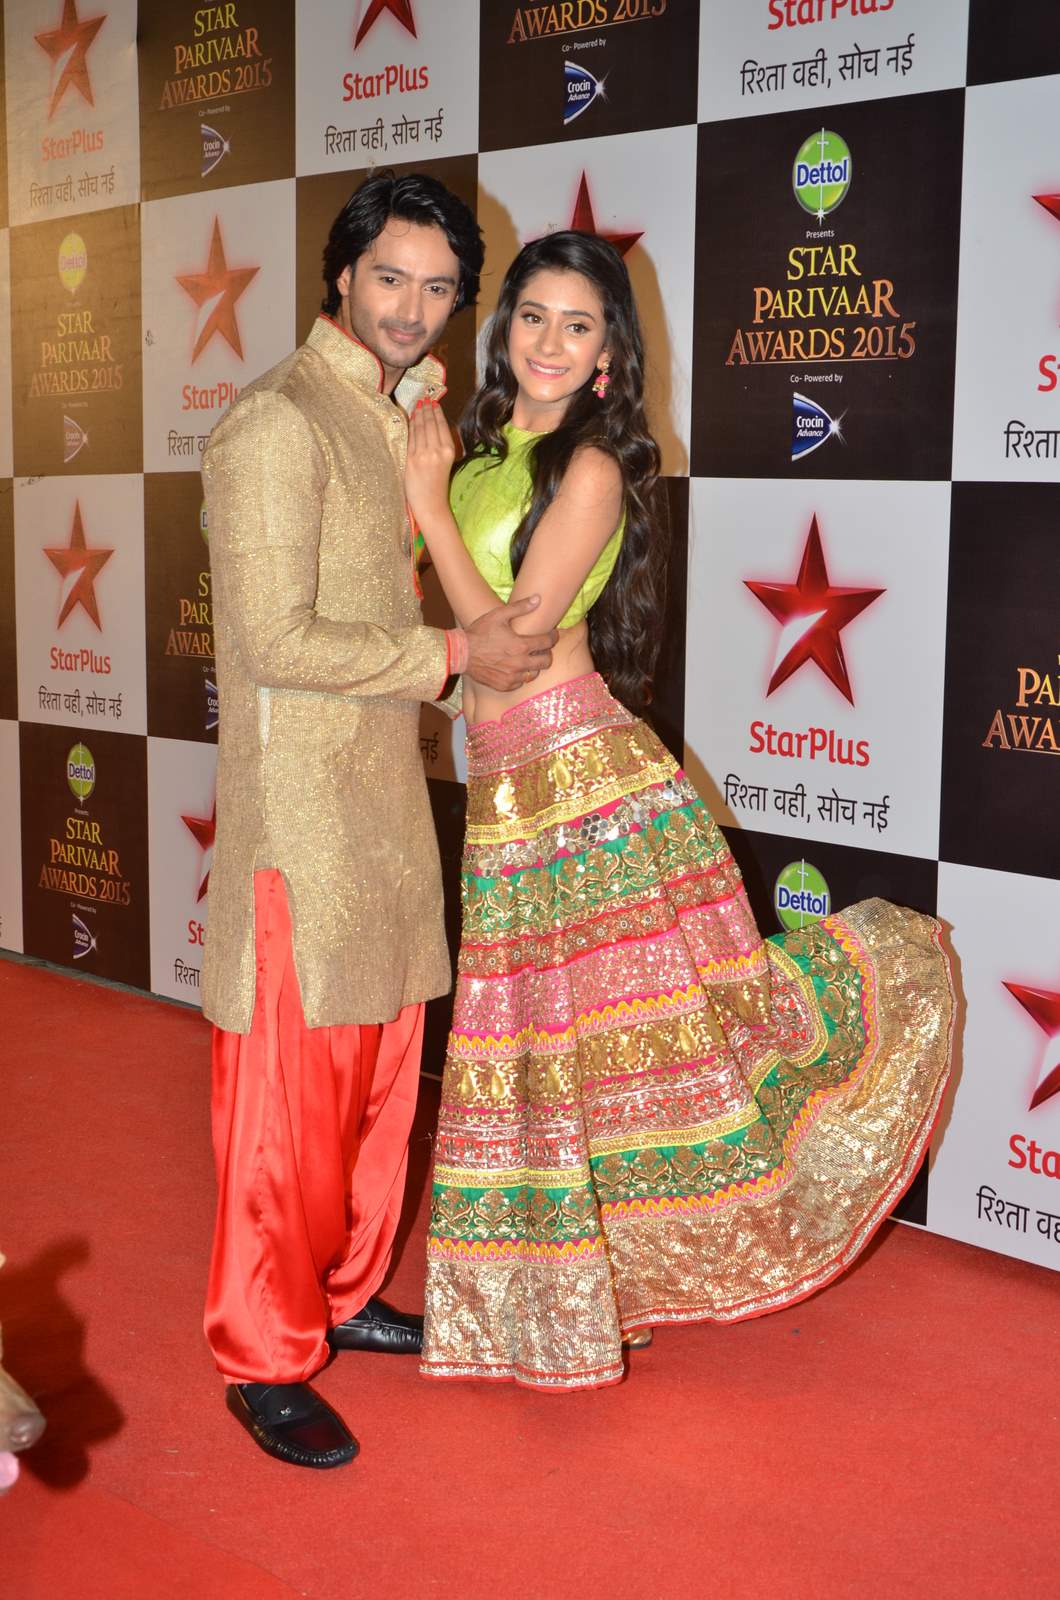 Amaya and Mantu from Tere Sheher Mein